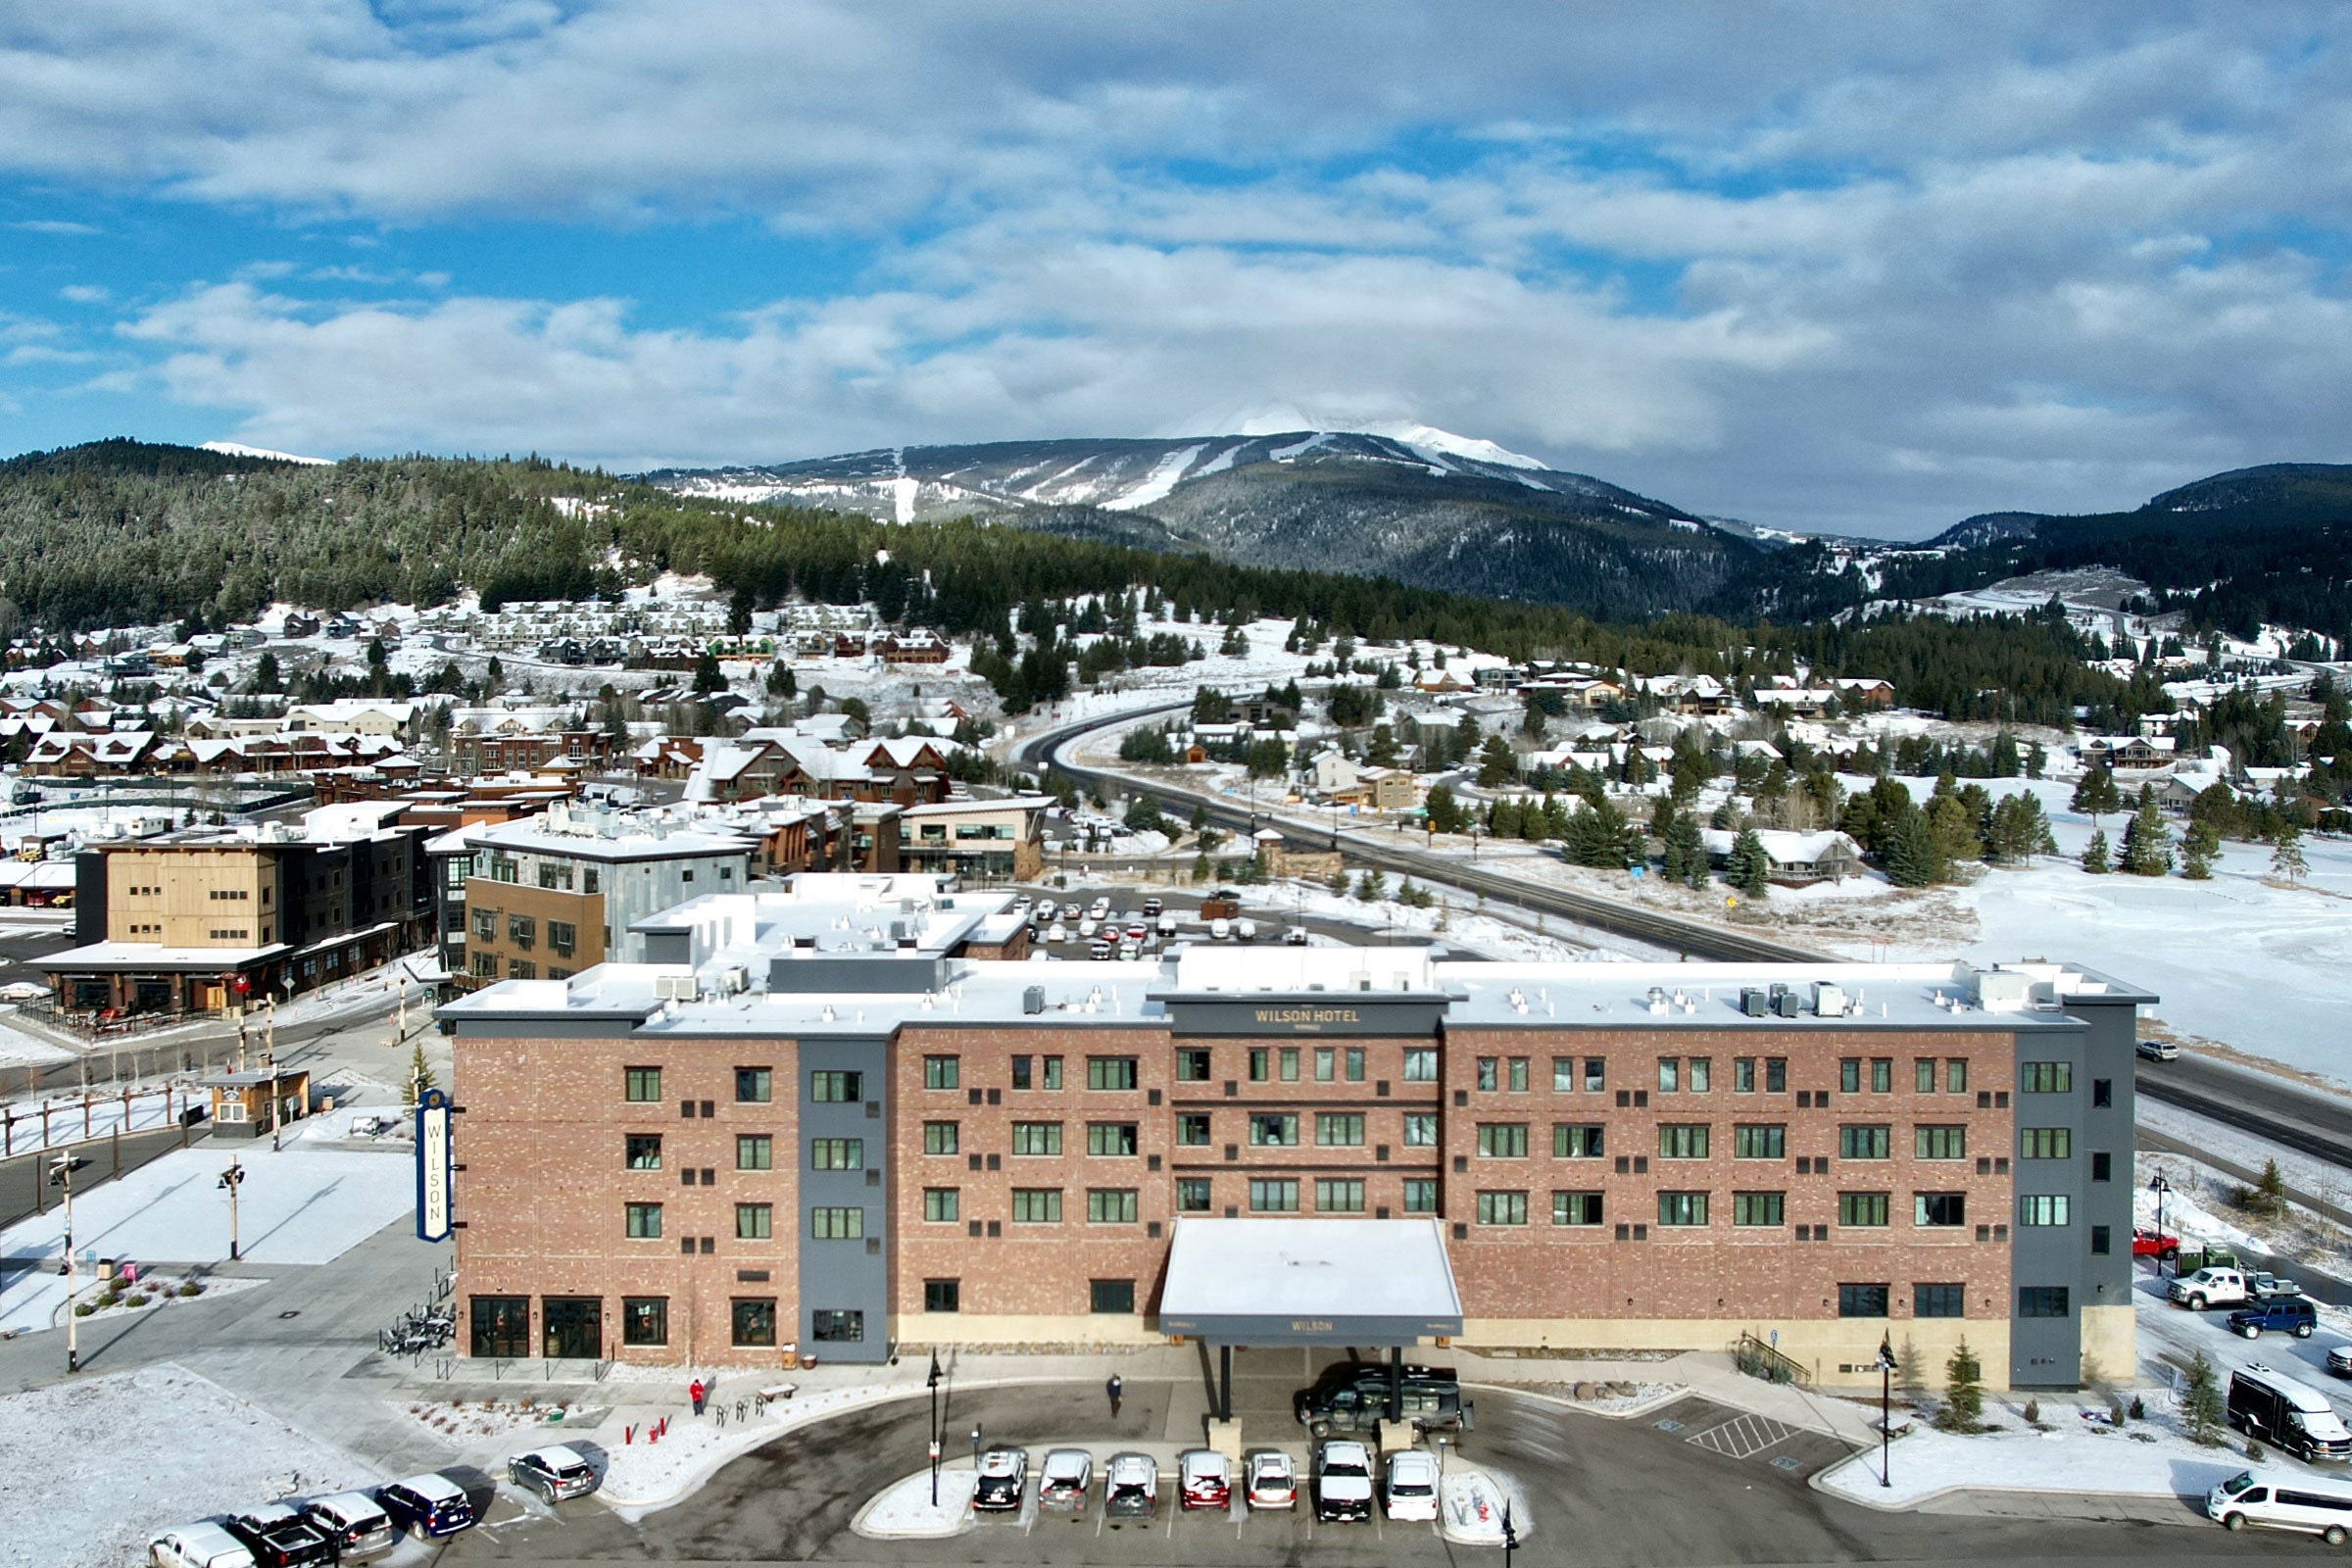 Featured image of Wilson Residence Inn Big Sky, MT by Zach Honig/The Points Guy.